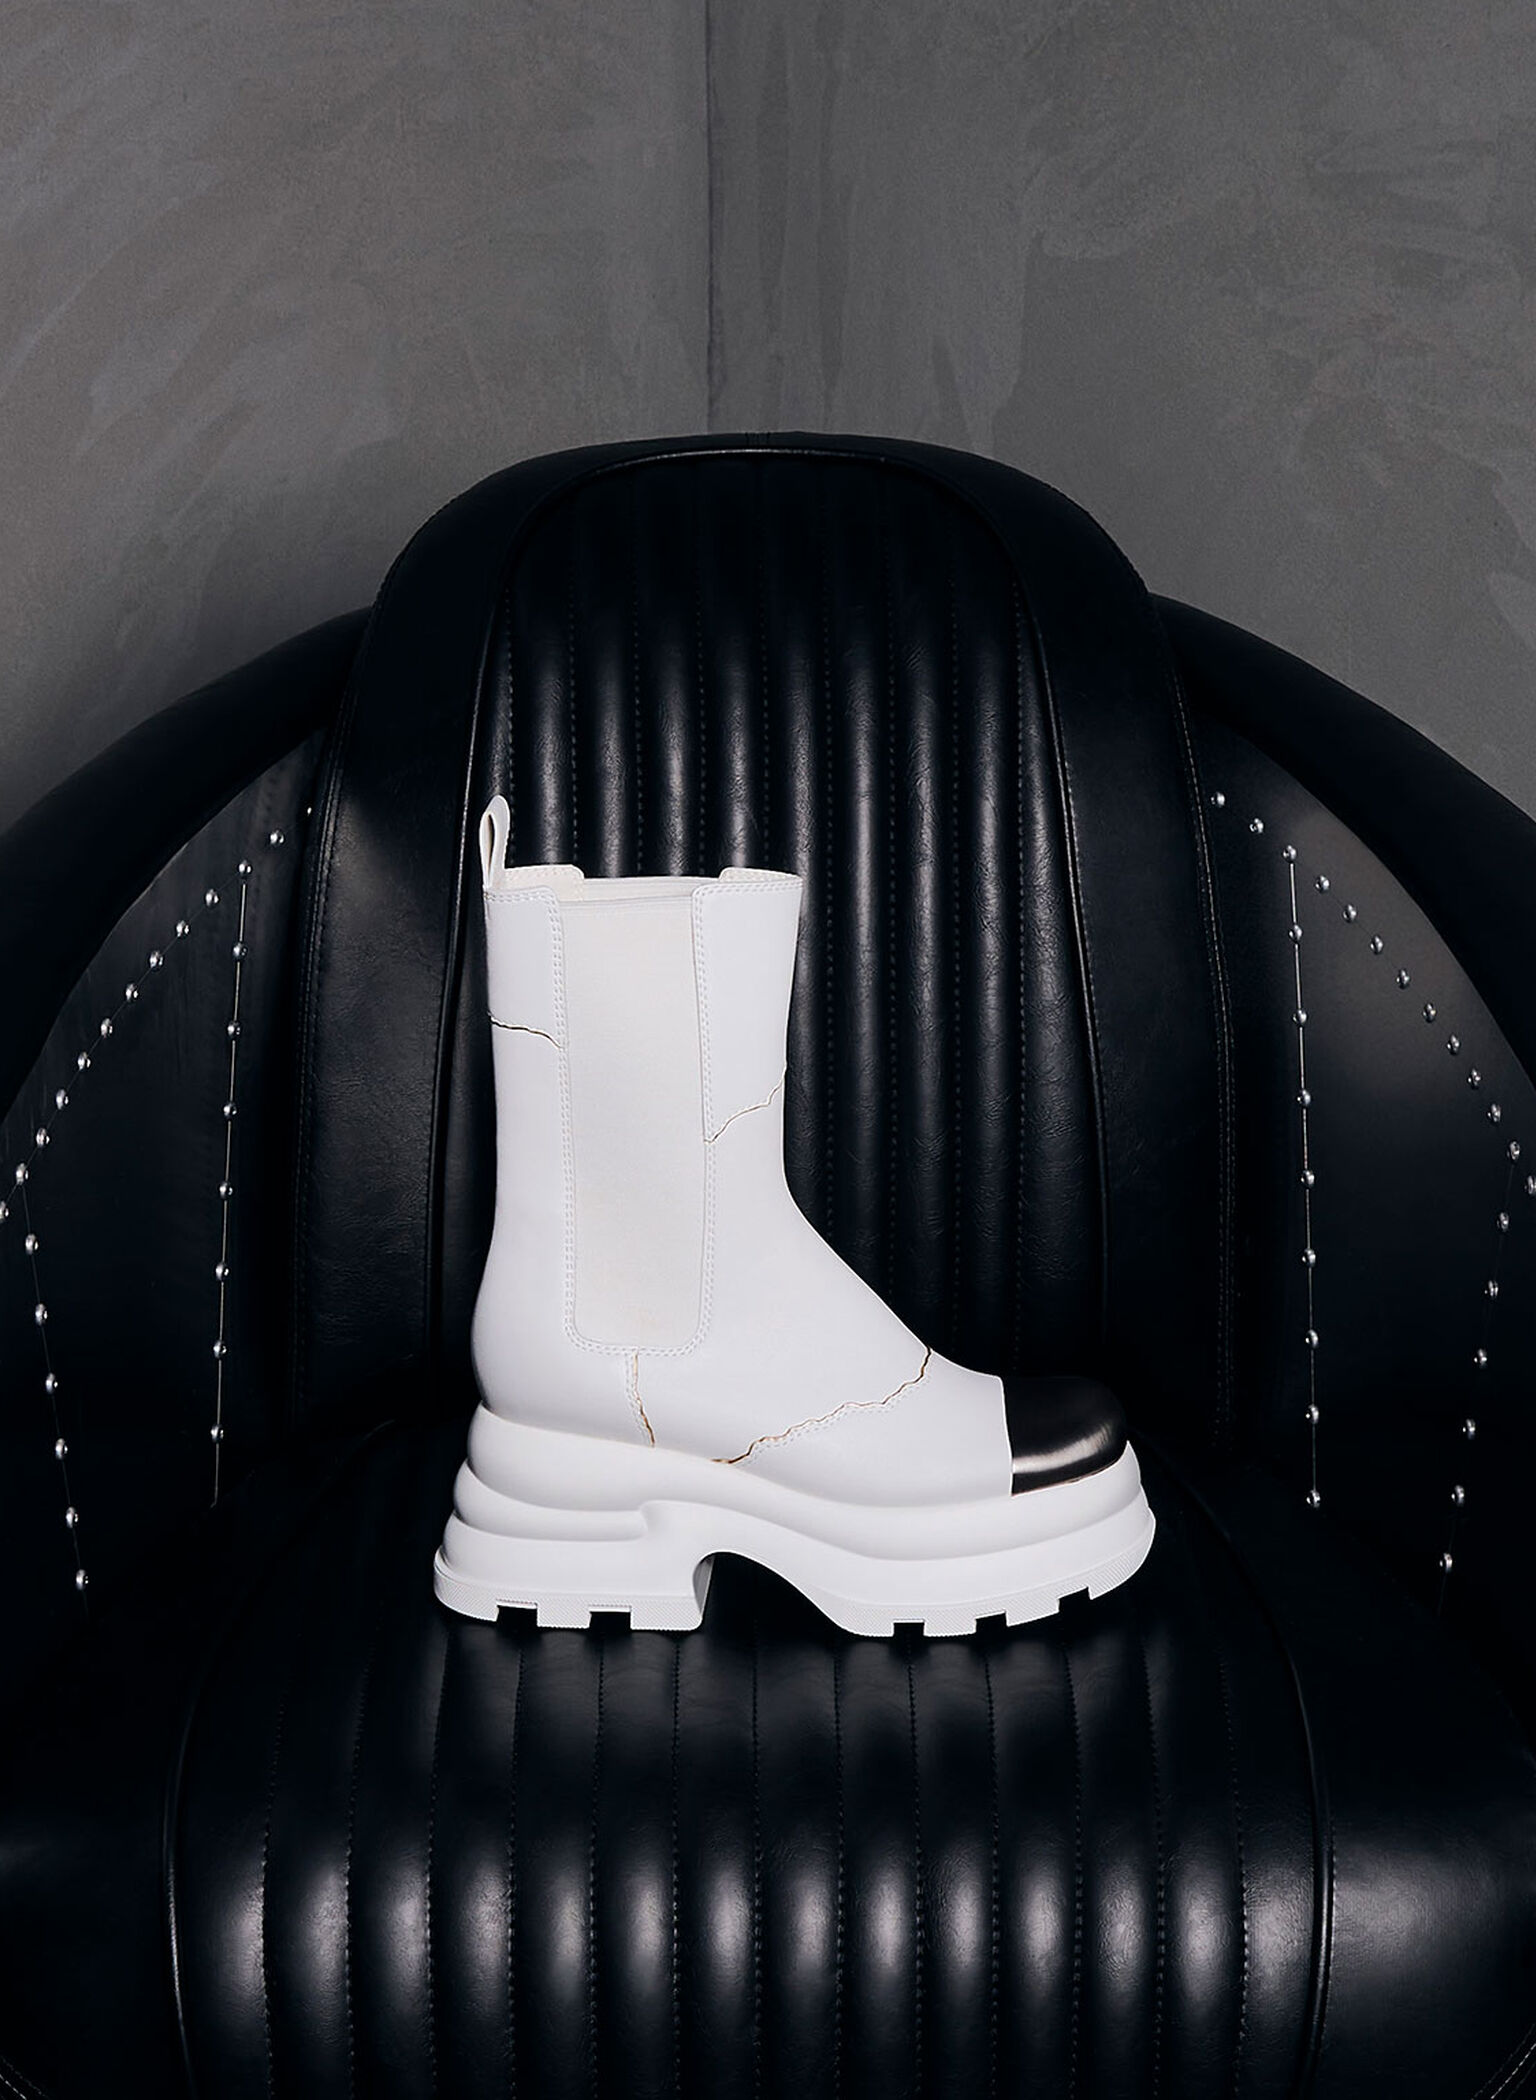 Jules Leather Chelsea Boots, White, hi-res